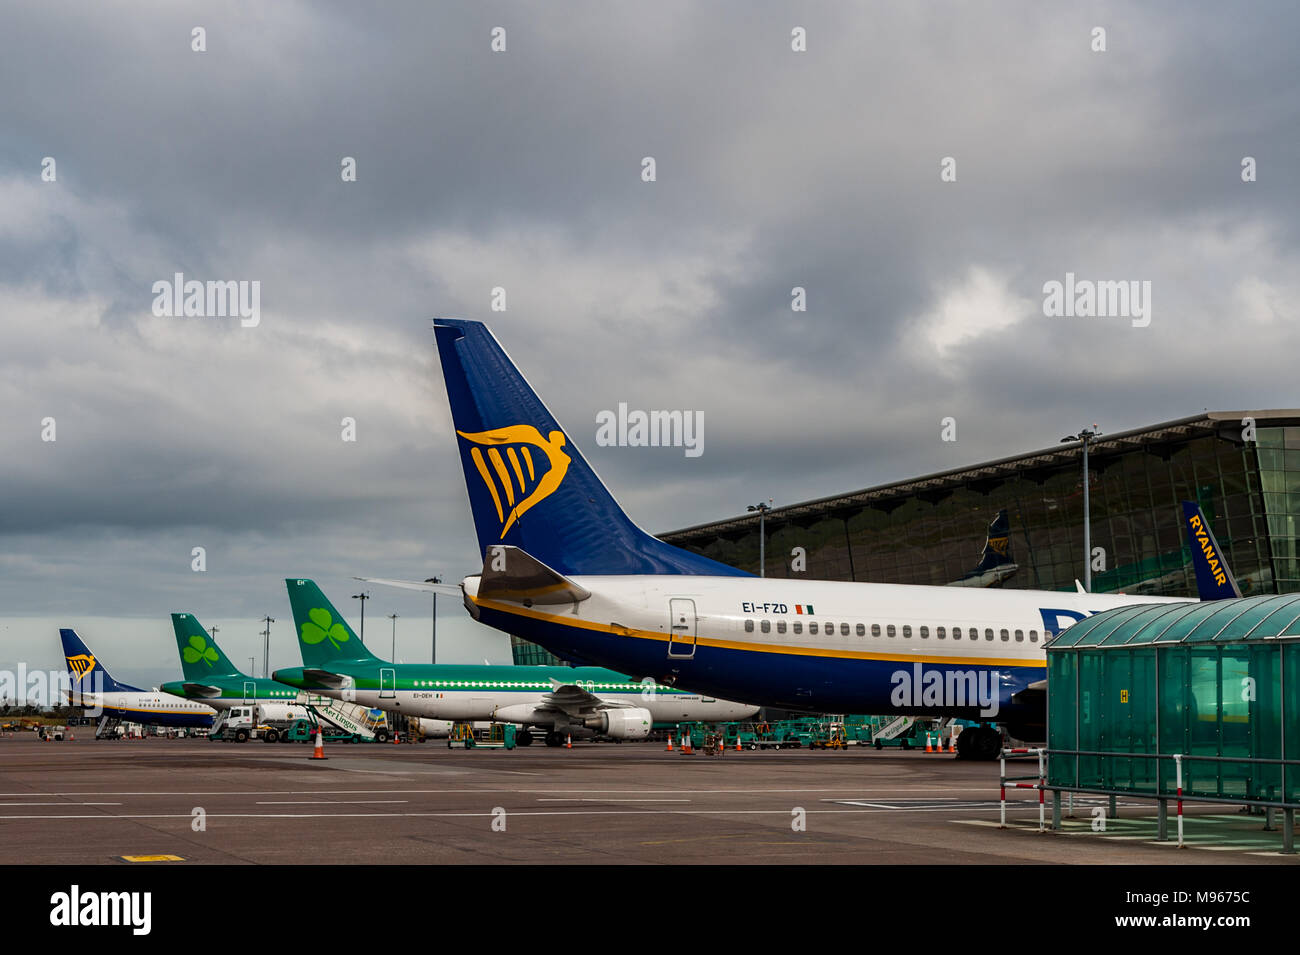 Aer Lingus and RyanAir Aircraft lined up at Cork Airport, Cork, Ireland with copy space. Stock Photo